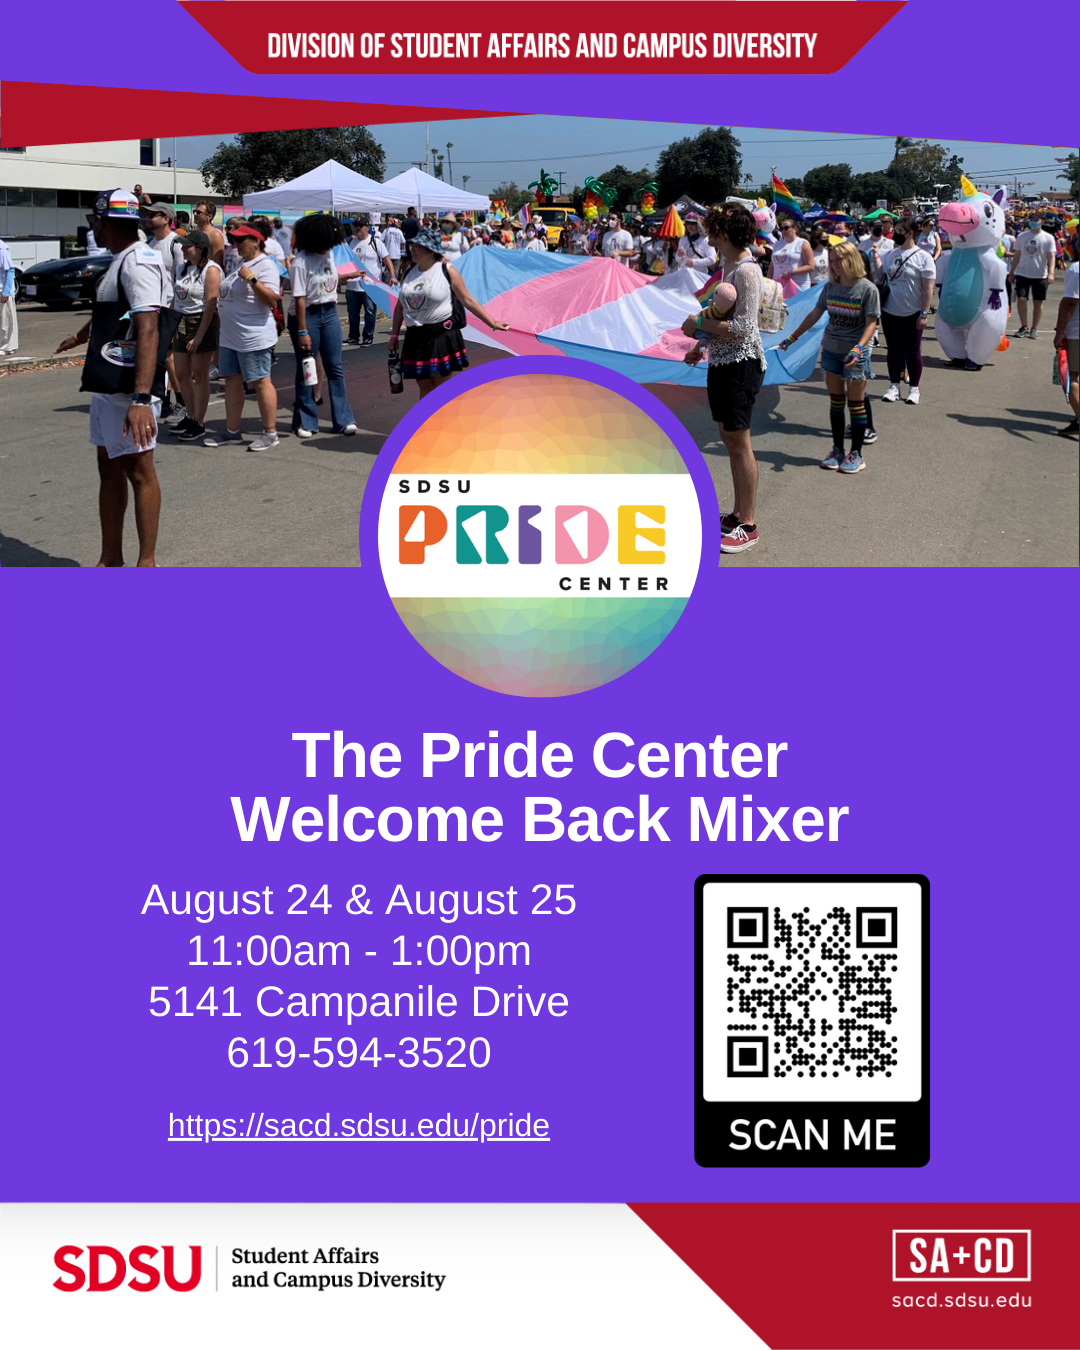 Pride Center Welcome Mixer Aug 24 & 25, 11 a.m. - 1 p.m. at The Pride Center